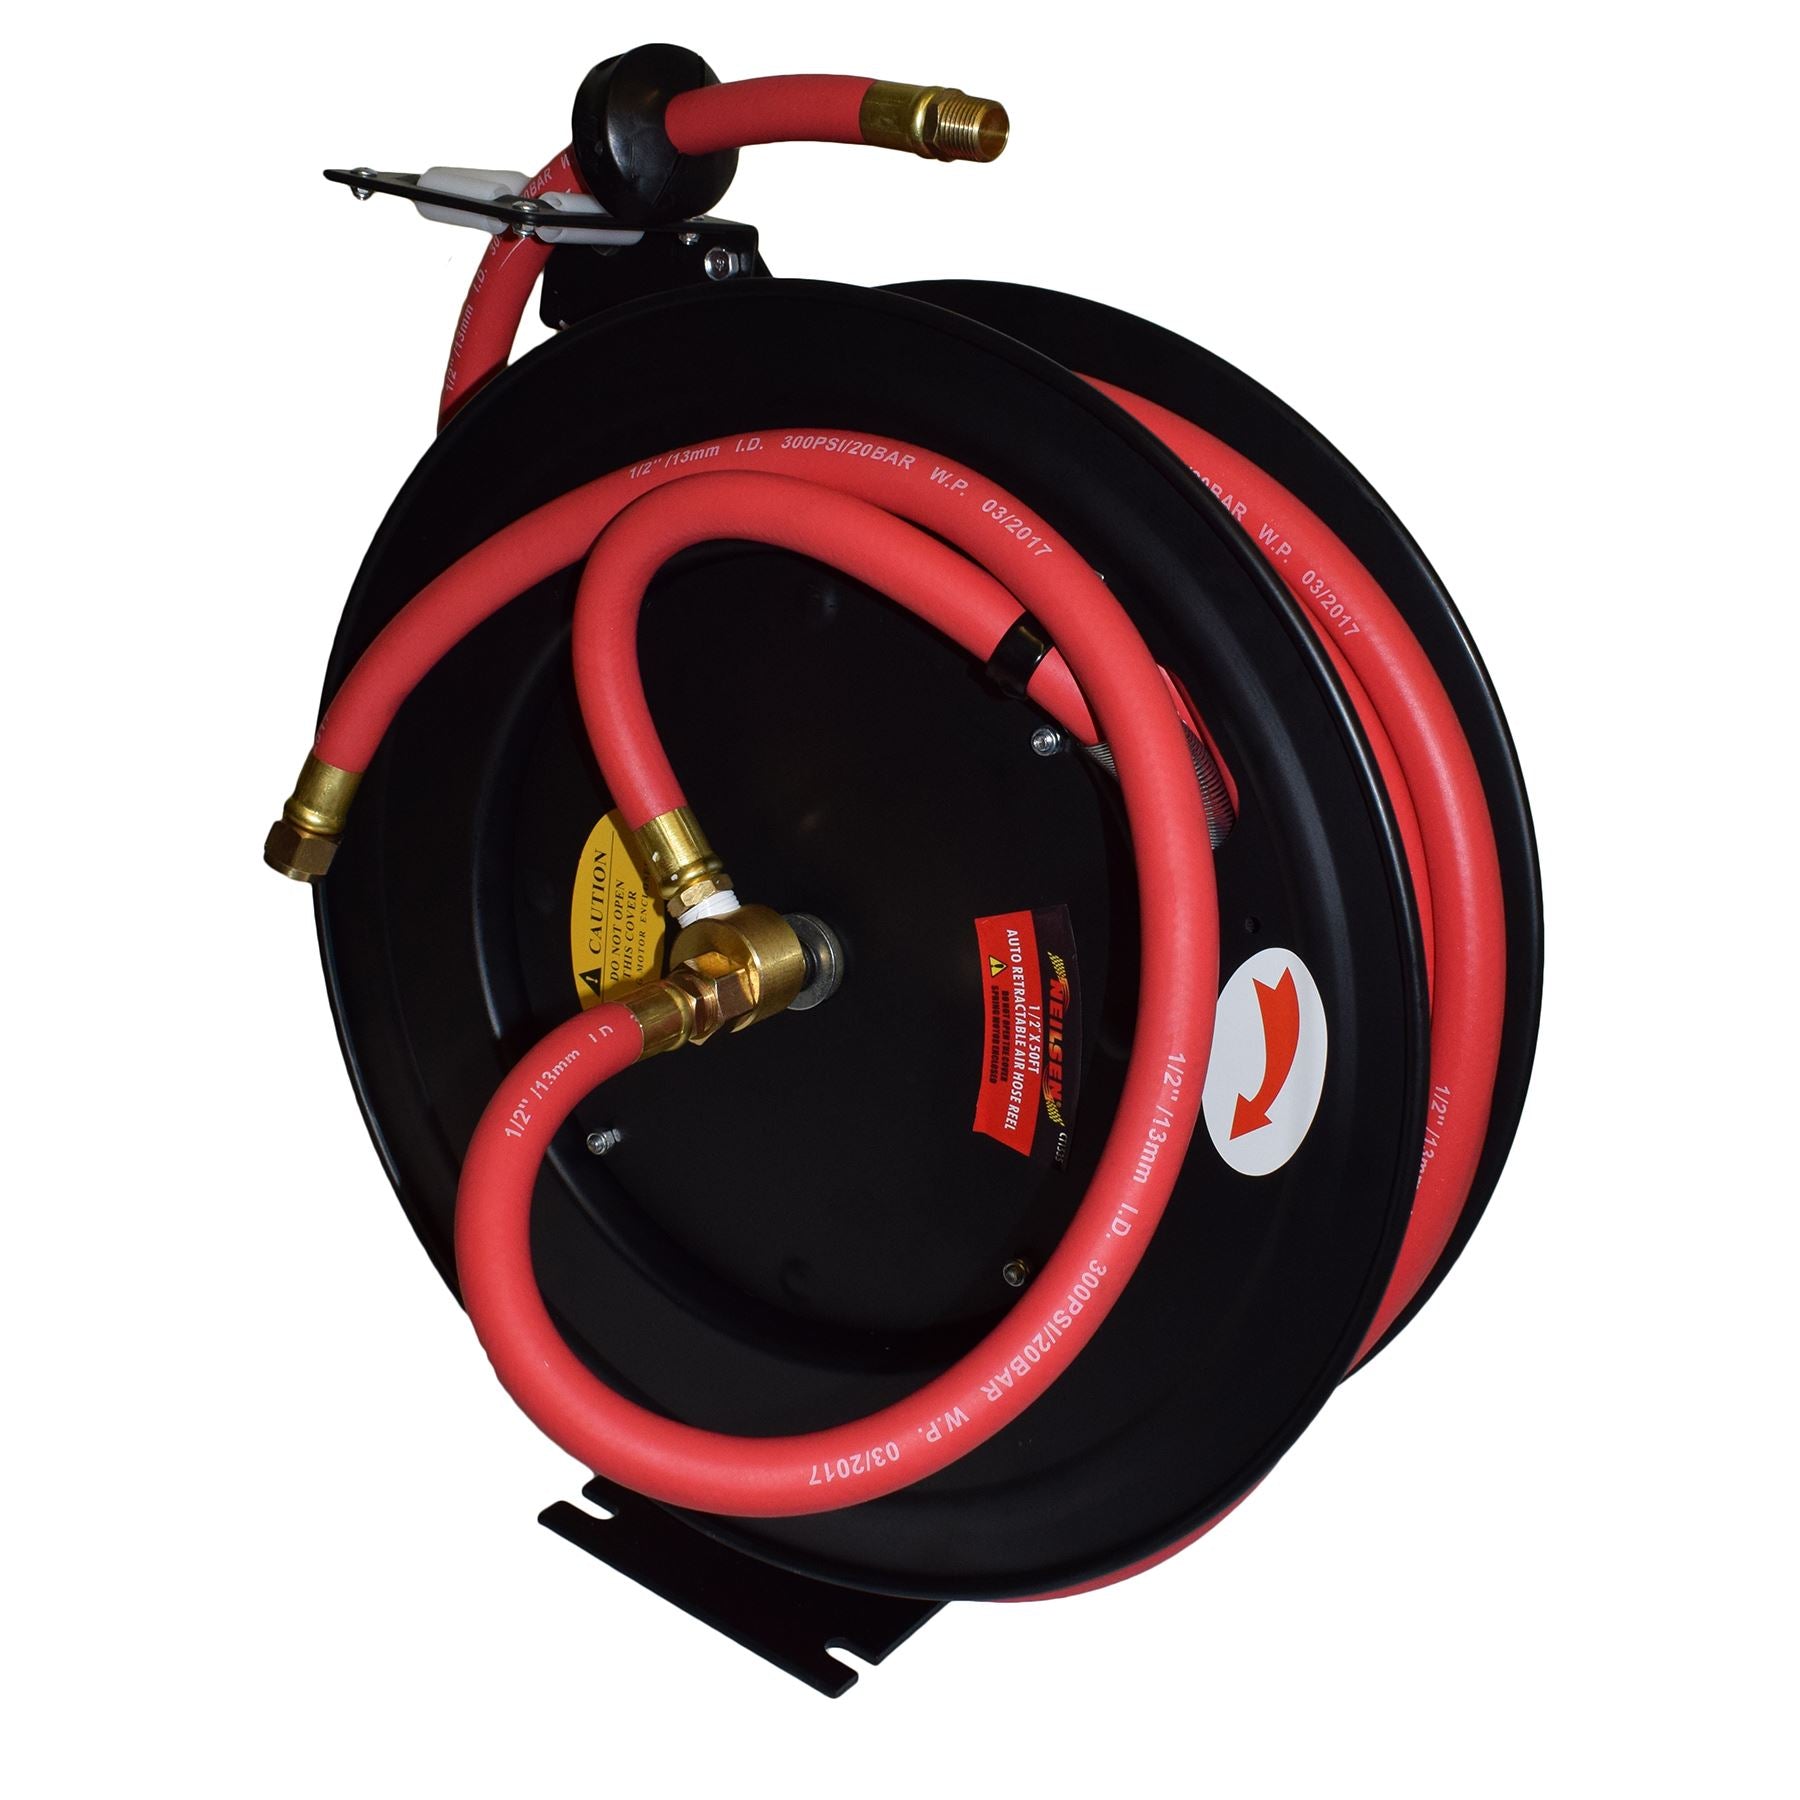 Retractable 50ft Air hose on Reel 1/2 BSP Spring Rewind Wall Mountable BSP AT455